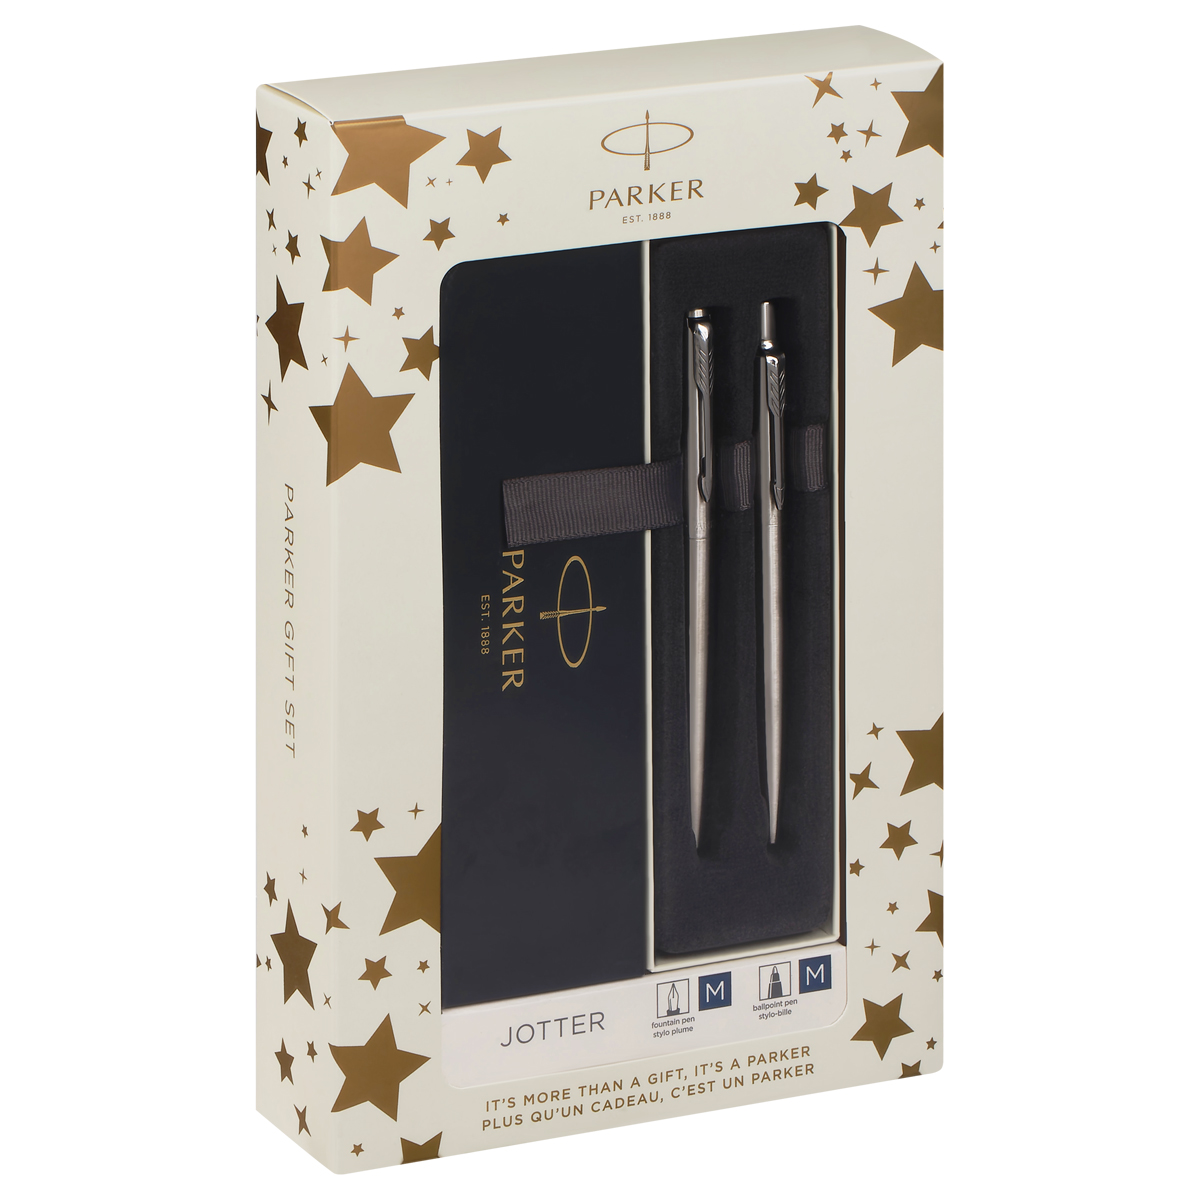  Parker "Jotter Stainless Steel CT":   